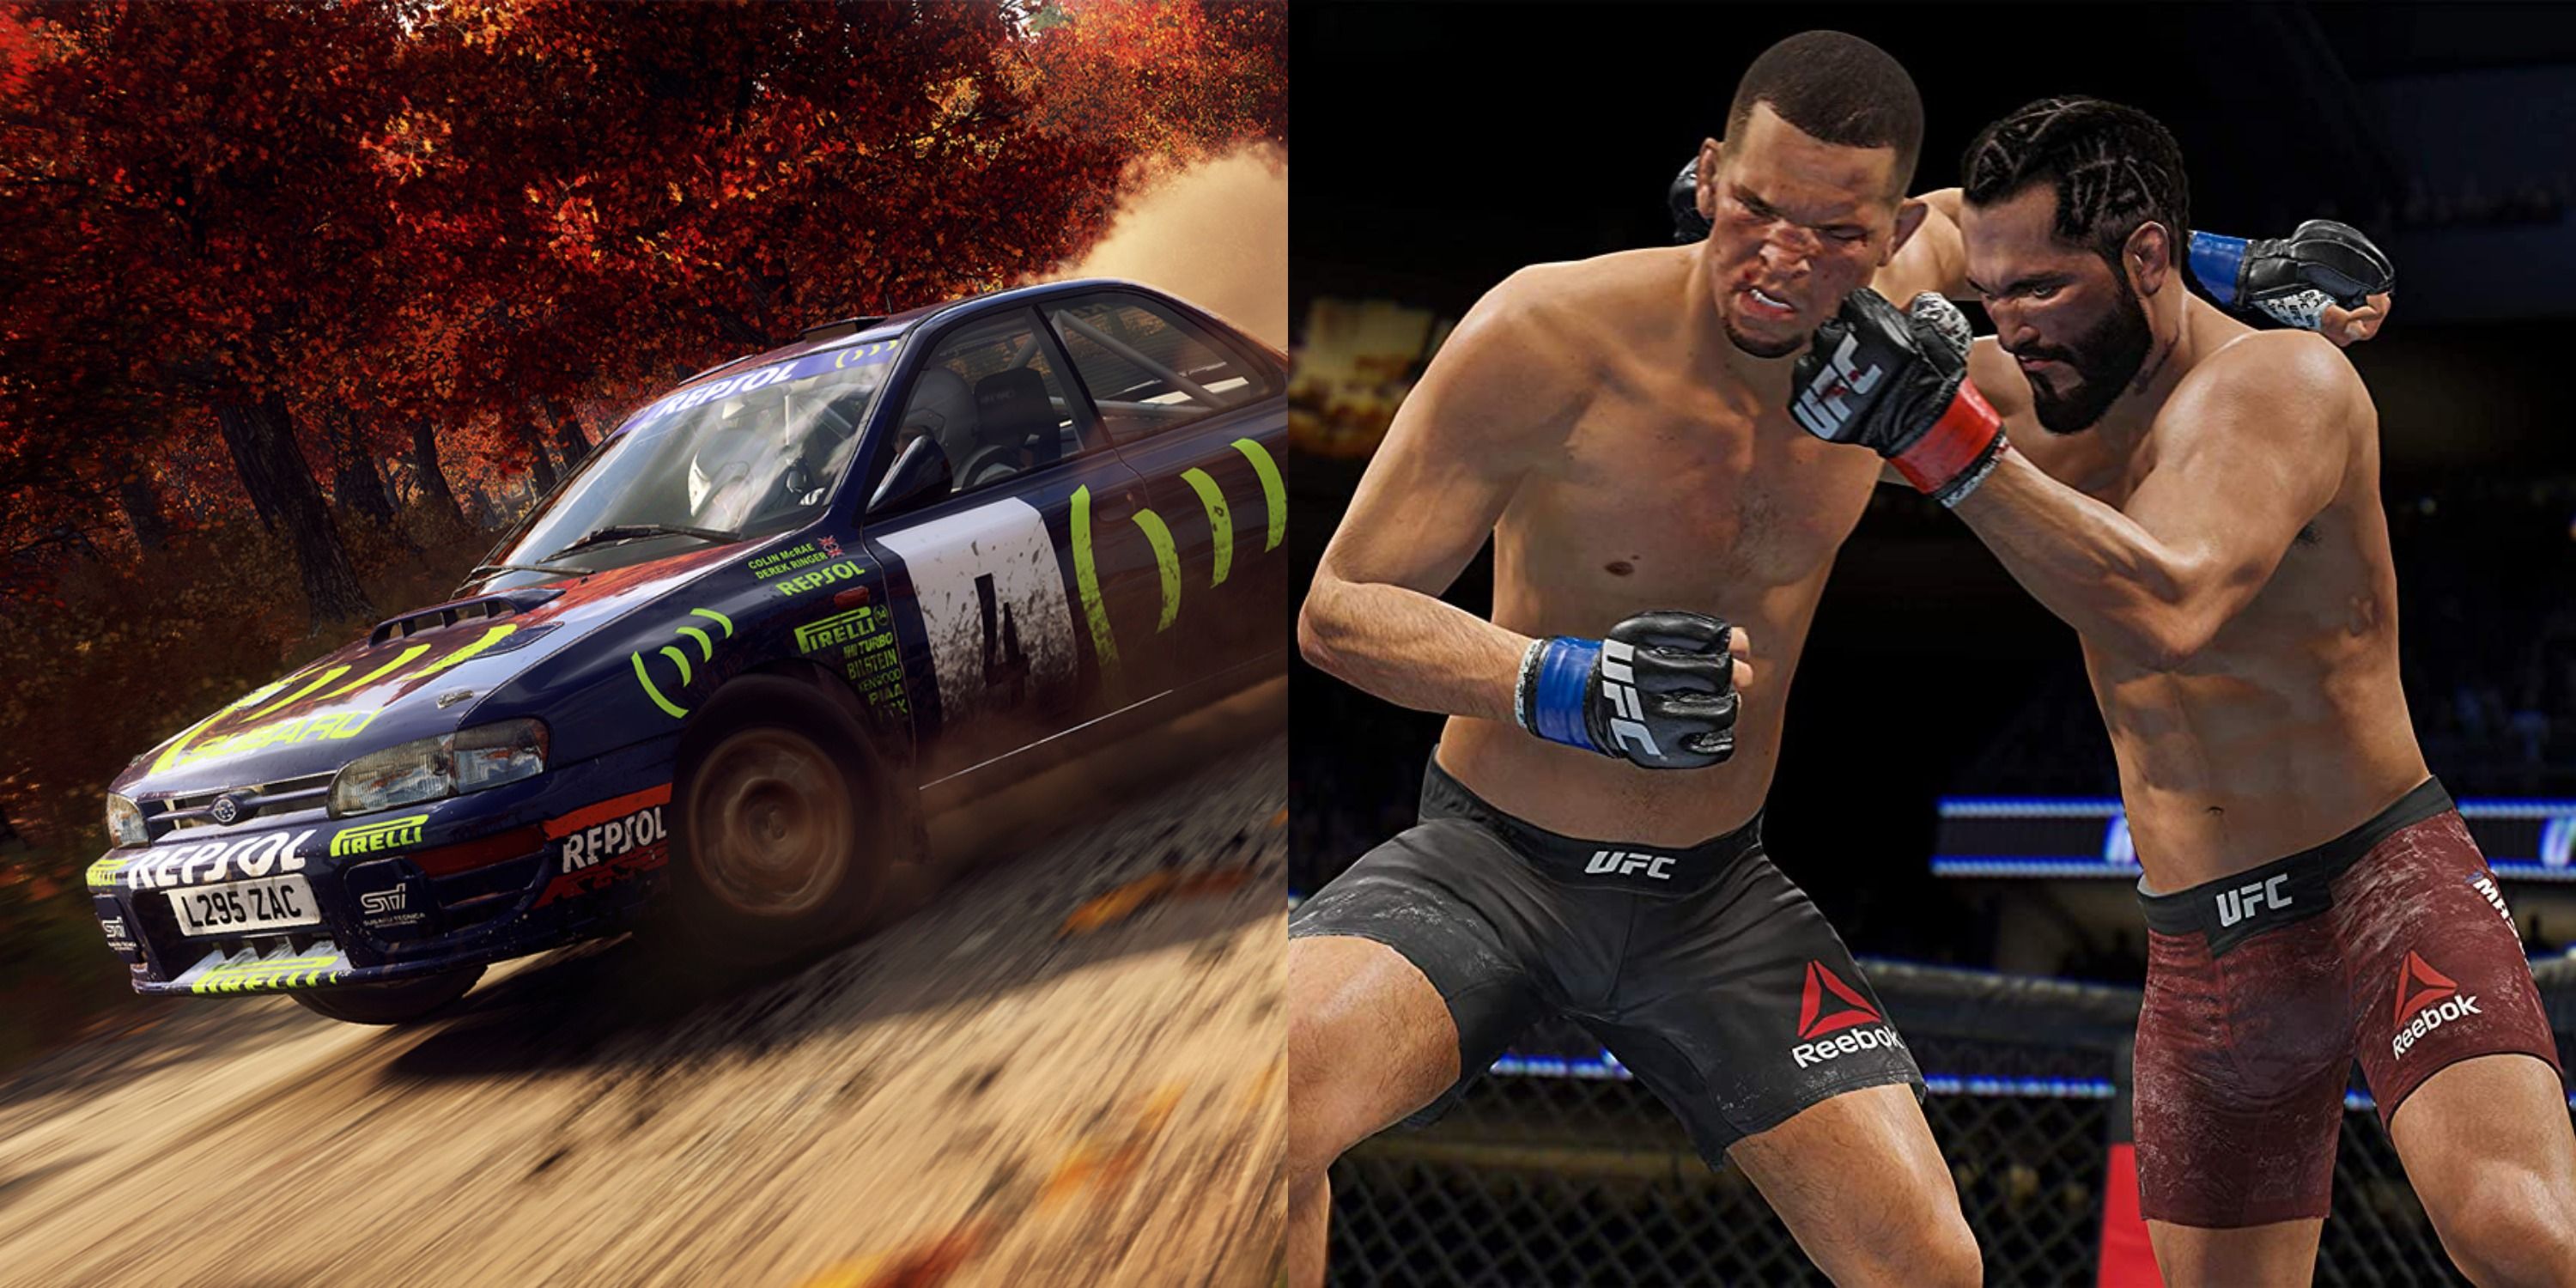 Featured image of Dirt Rally 2 gameplay and UFC 4 gameplay